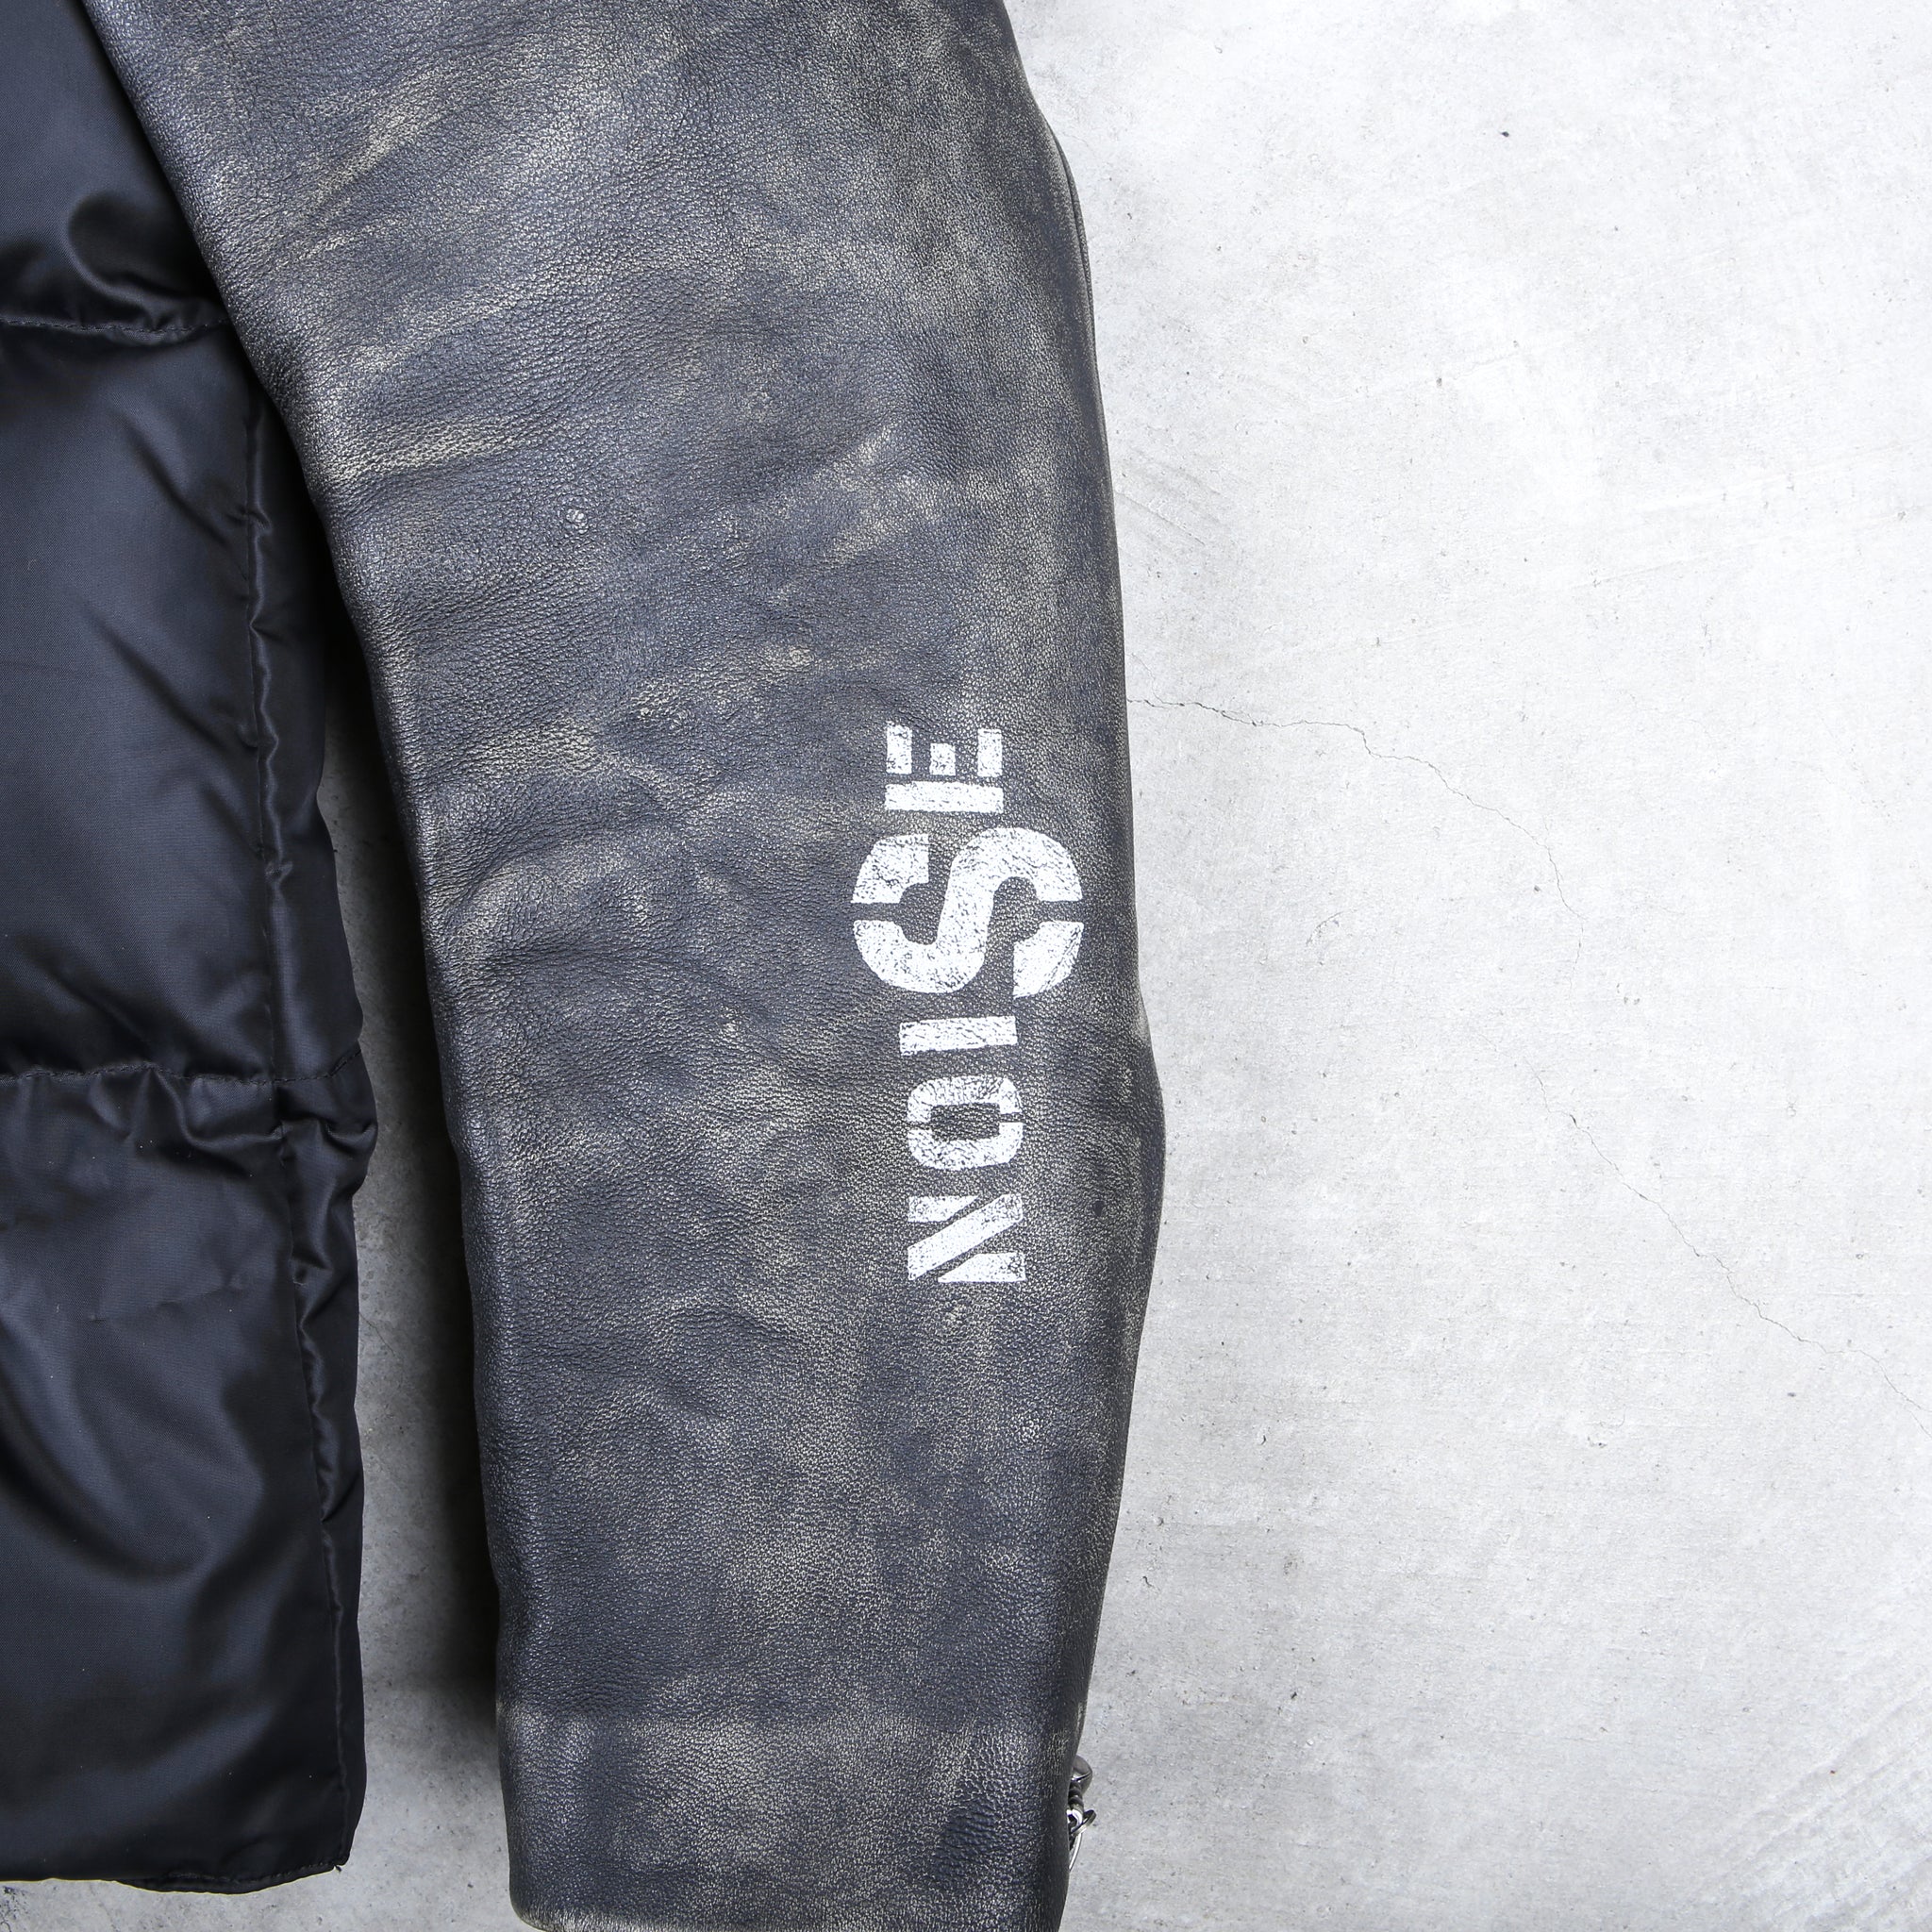 Undercover AW/05 Hybrid Leather Jacket from 25 Year Retrospective